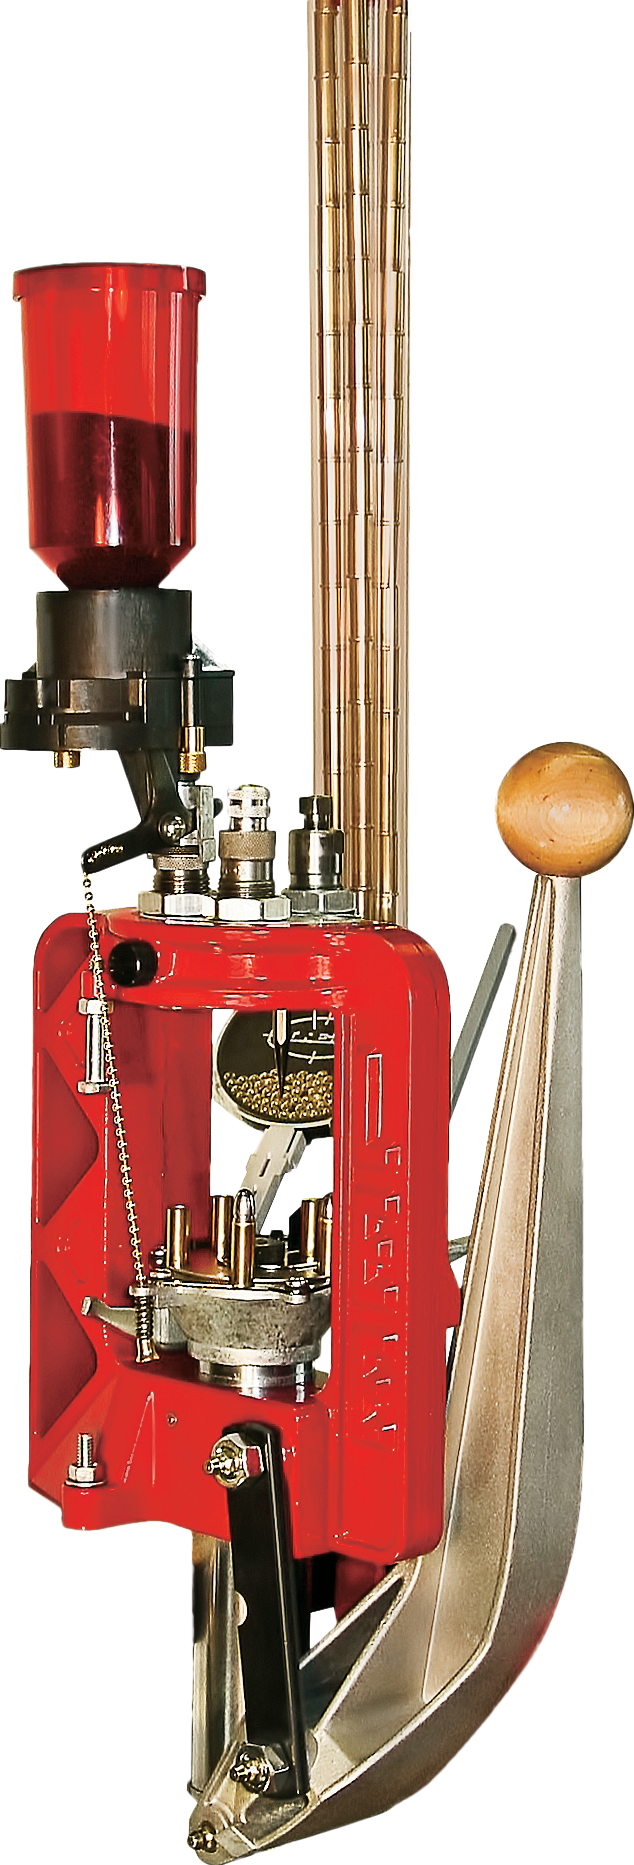 Lee Precision Progressive 3-Hole Reloading Kit for 32 SandW and 32 HandR  Magnum - Complete Set with Press, Dies, Turret, Shell Plate, and Powder  Measure in the Sports Equipment department at